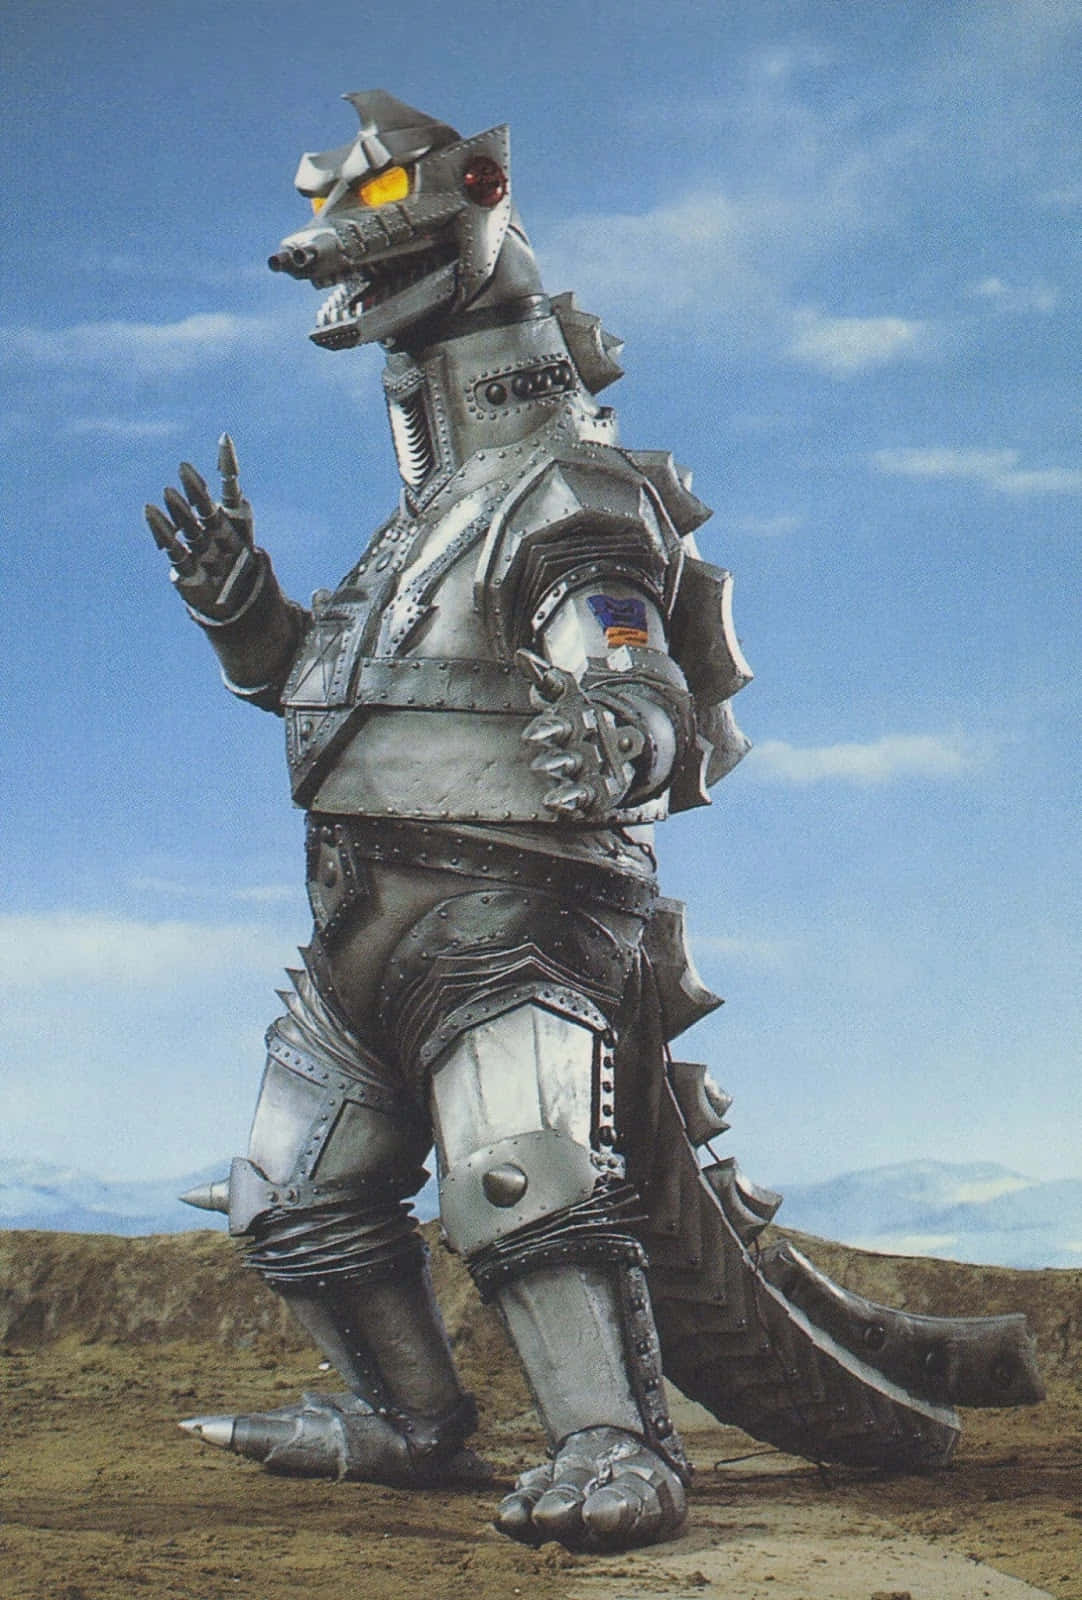 Mechagodzilla, The Powerful Robotic Titan, Stands Tall Against A Flaming Backdrop. Background